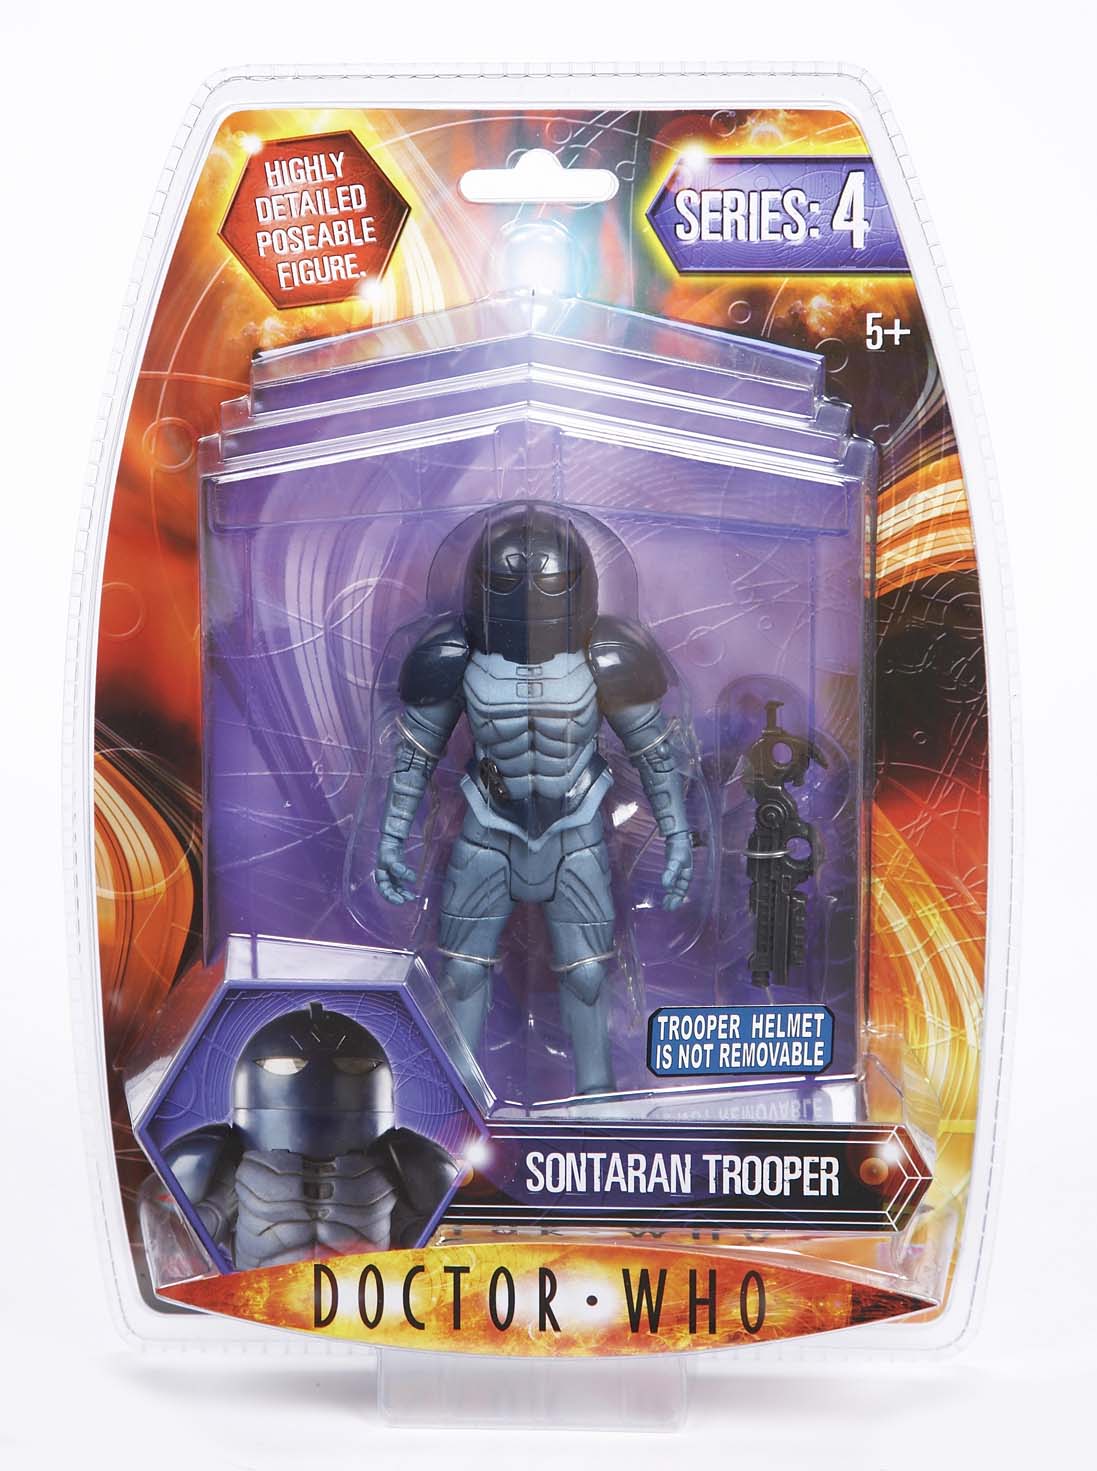 SONTARAN TROOPER SOLIDS - DR WHO ACTION FIGS 4